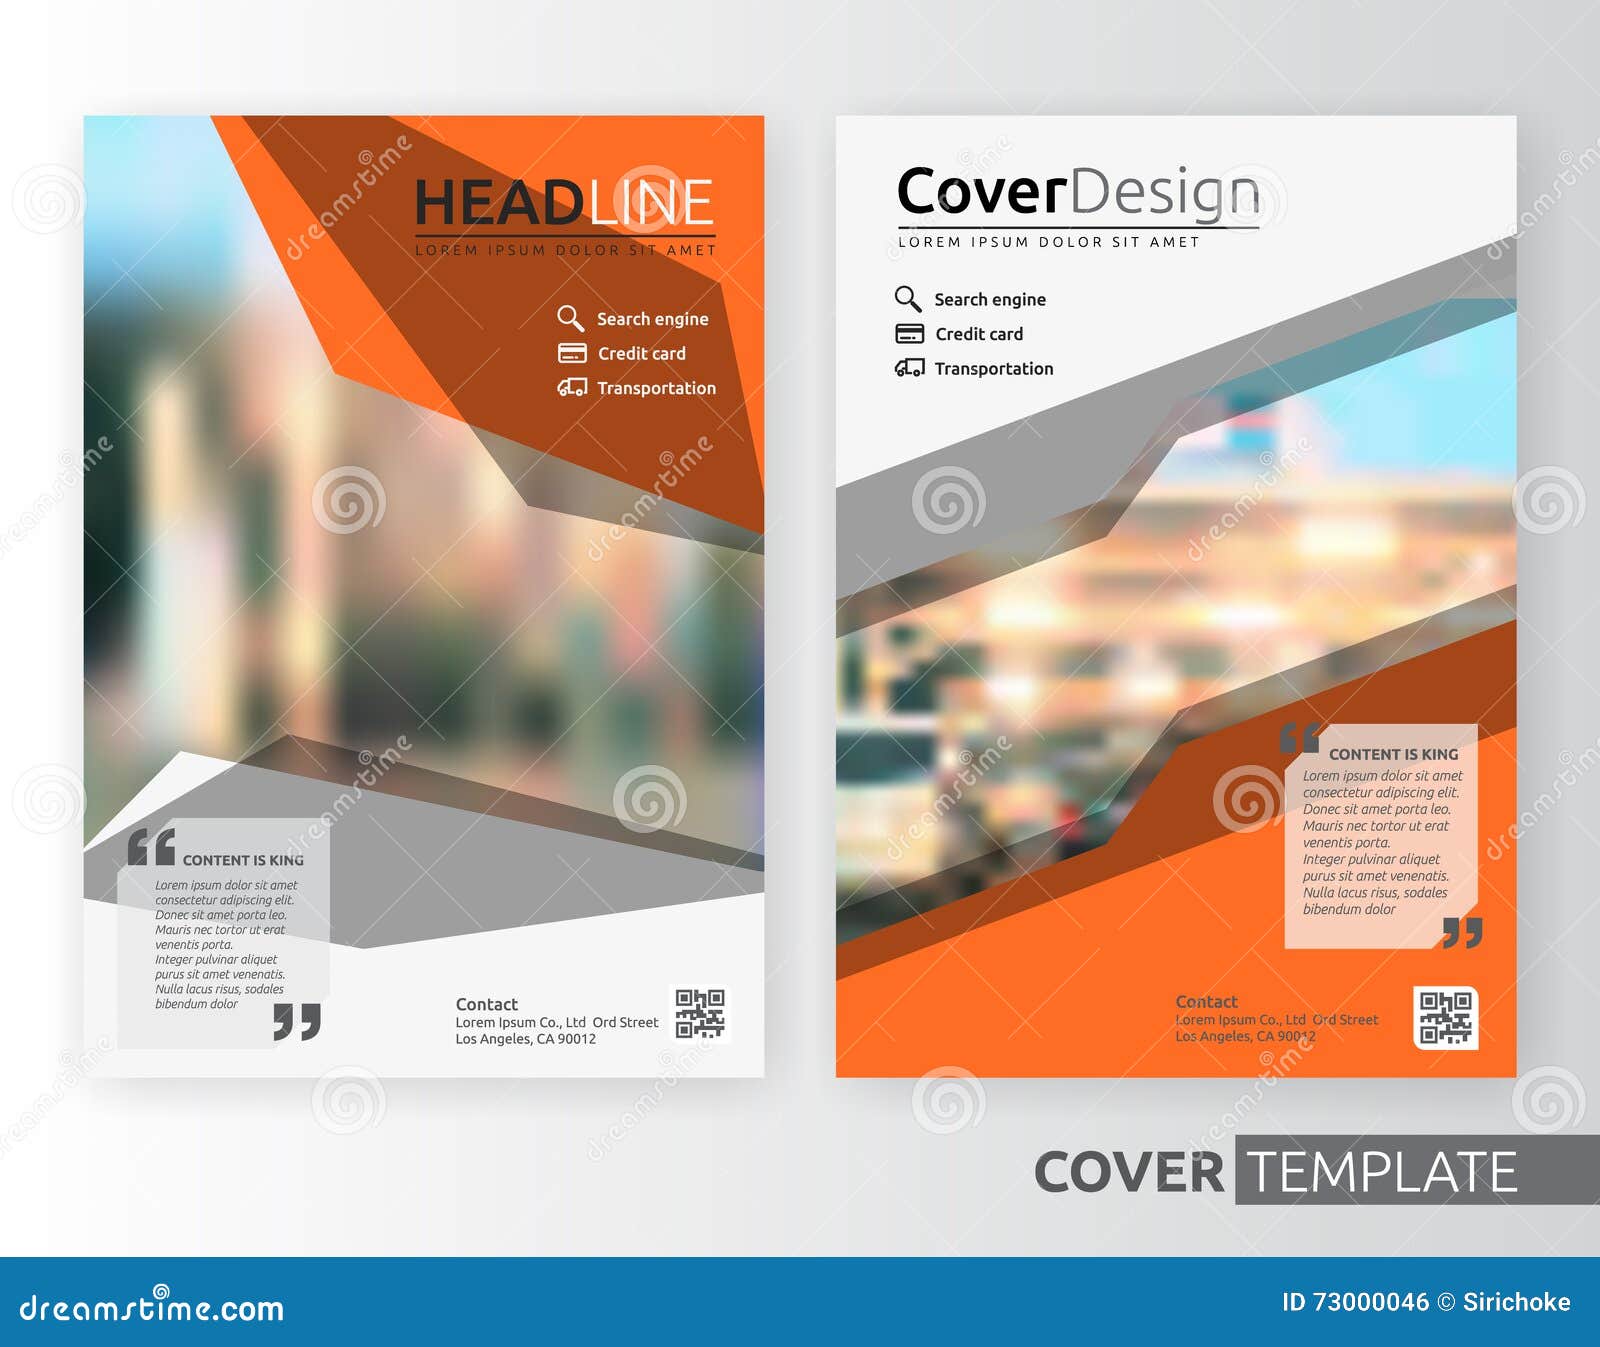 Abstract Business And Corporate Cover Design Stock Vector - Image: 73000046